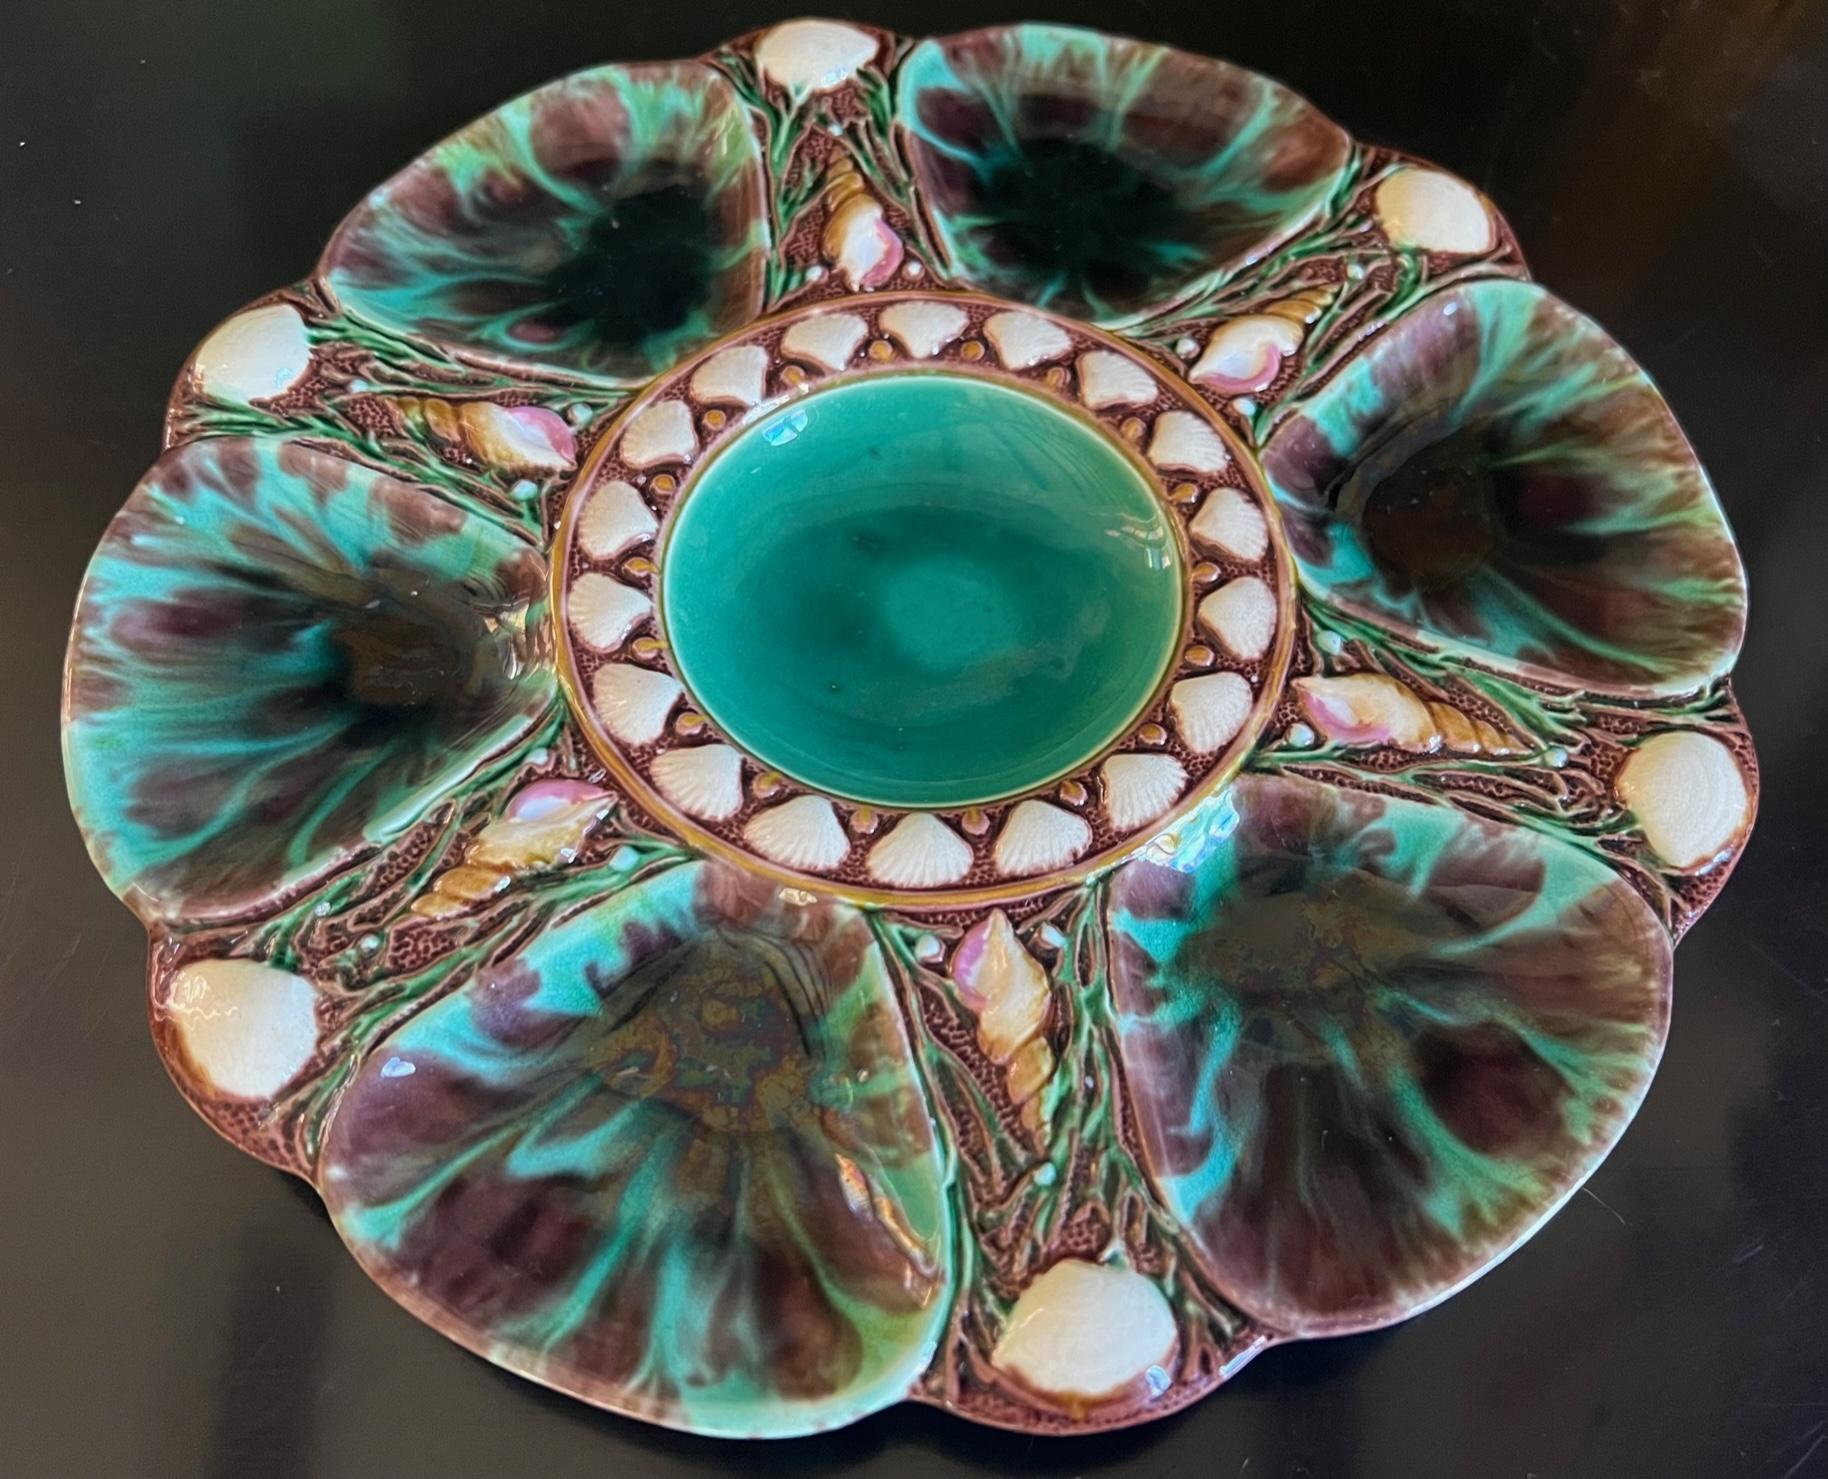 Antique Minton Green Majolica Oyster Plate, circa 1860's-1870's For Sale 4